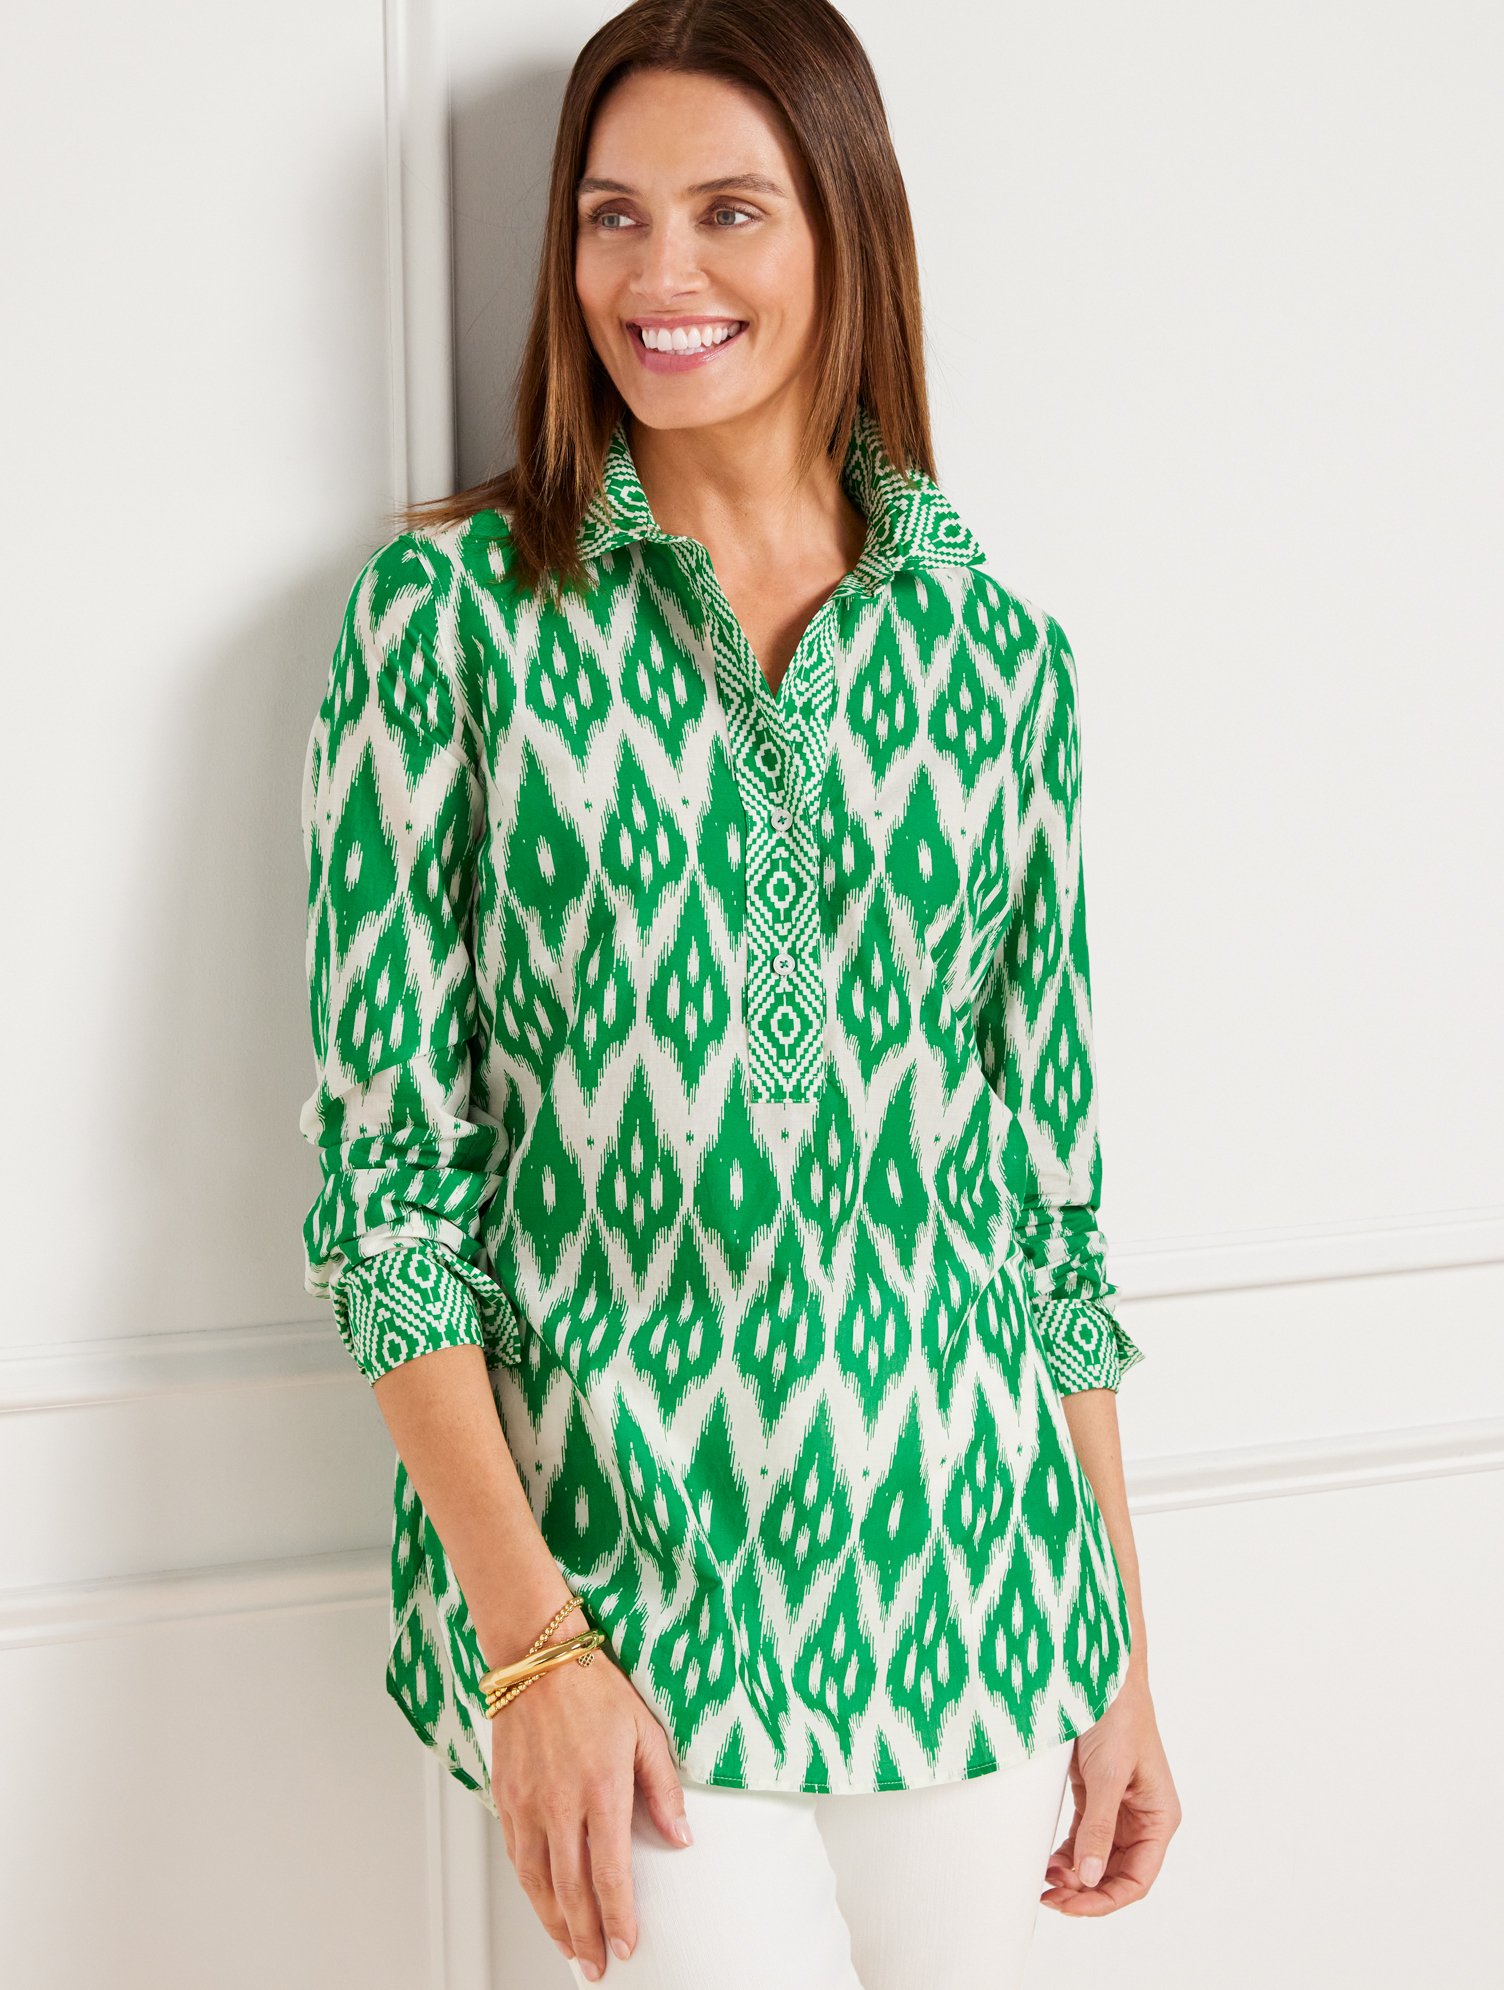 Talbots Leafy Ikat Border Tunic Top - Spring Leaves/ivory - Large - 100% Cotton  In Spring Leaves,ivory